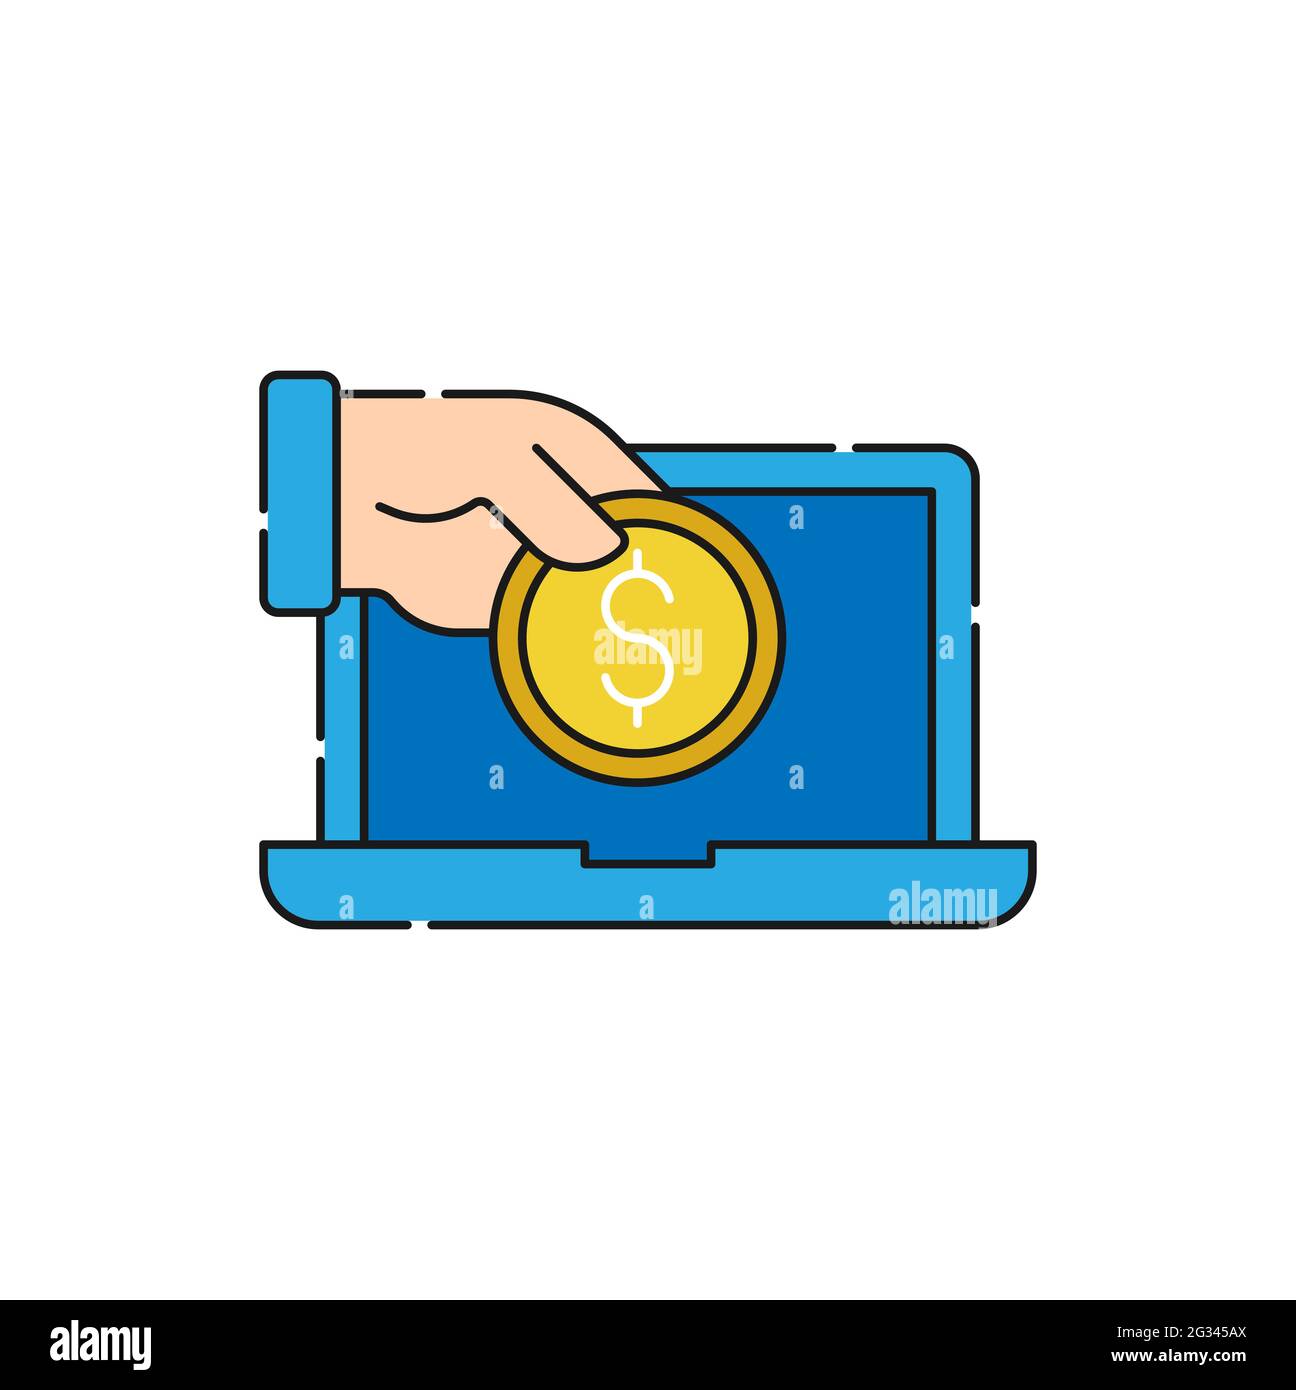 Digital Mobile Payment icon Vector Illustration. Modern Mobile Payment with Smartphone icon vector design concept for Online Payment, Finance, and Mob Stock Vector